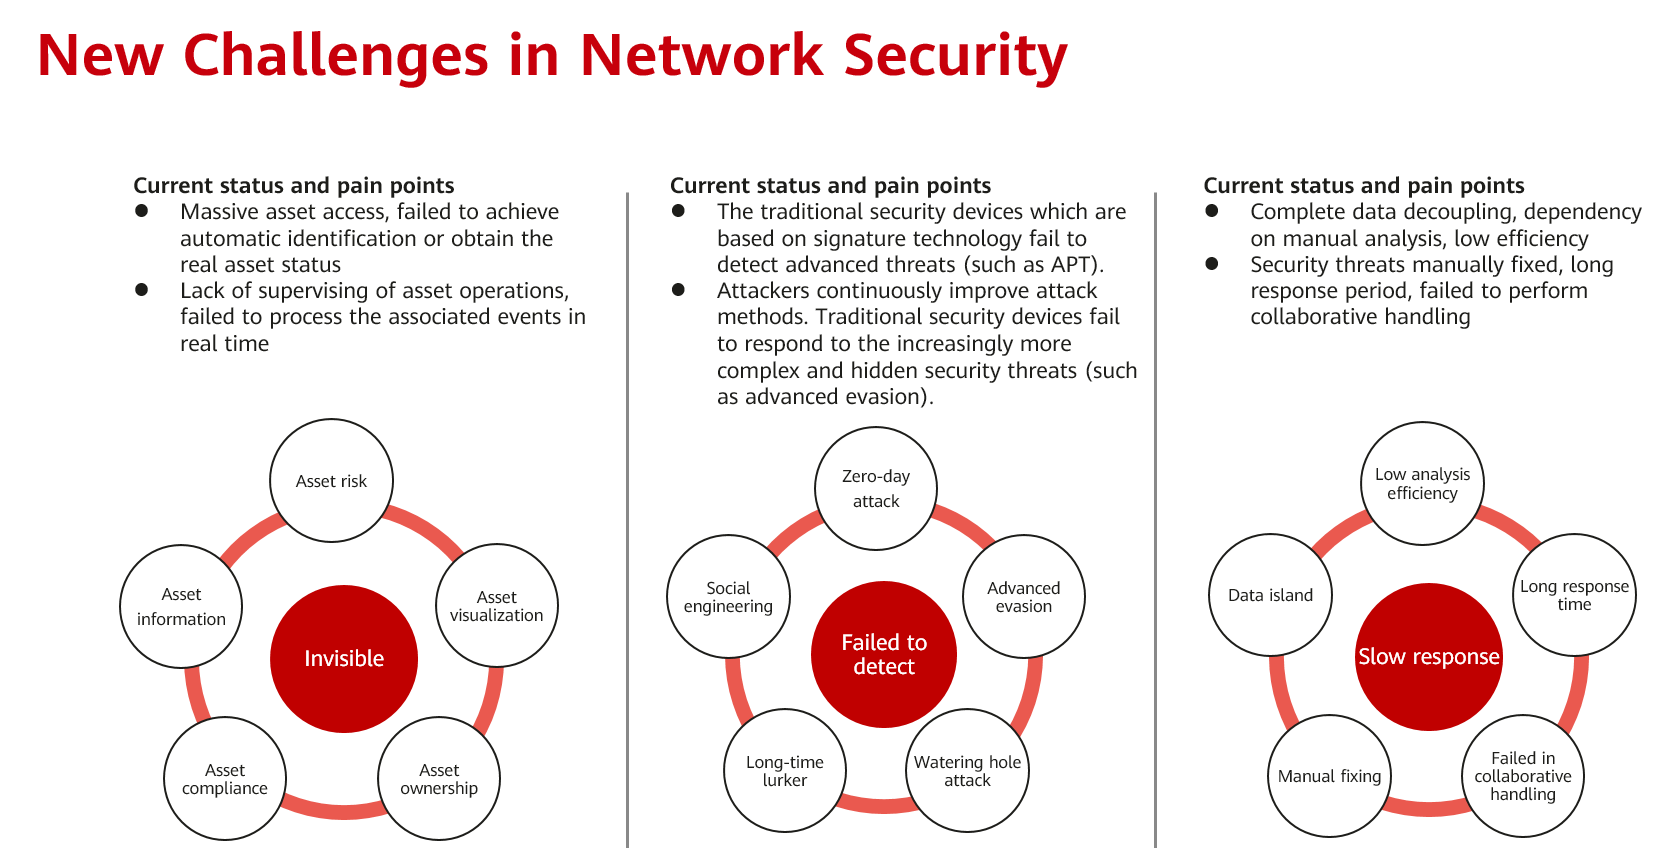 New challenges in network security